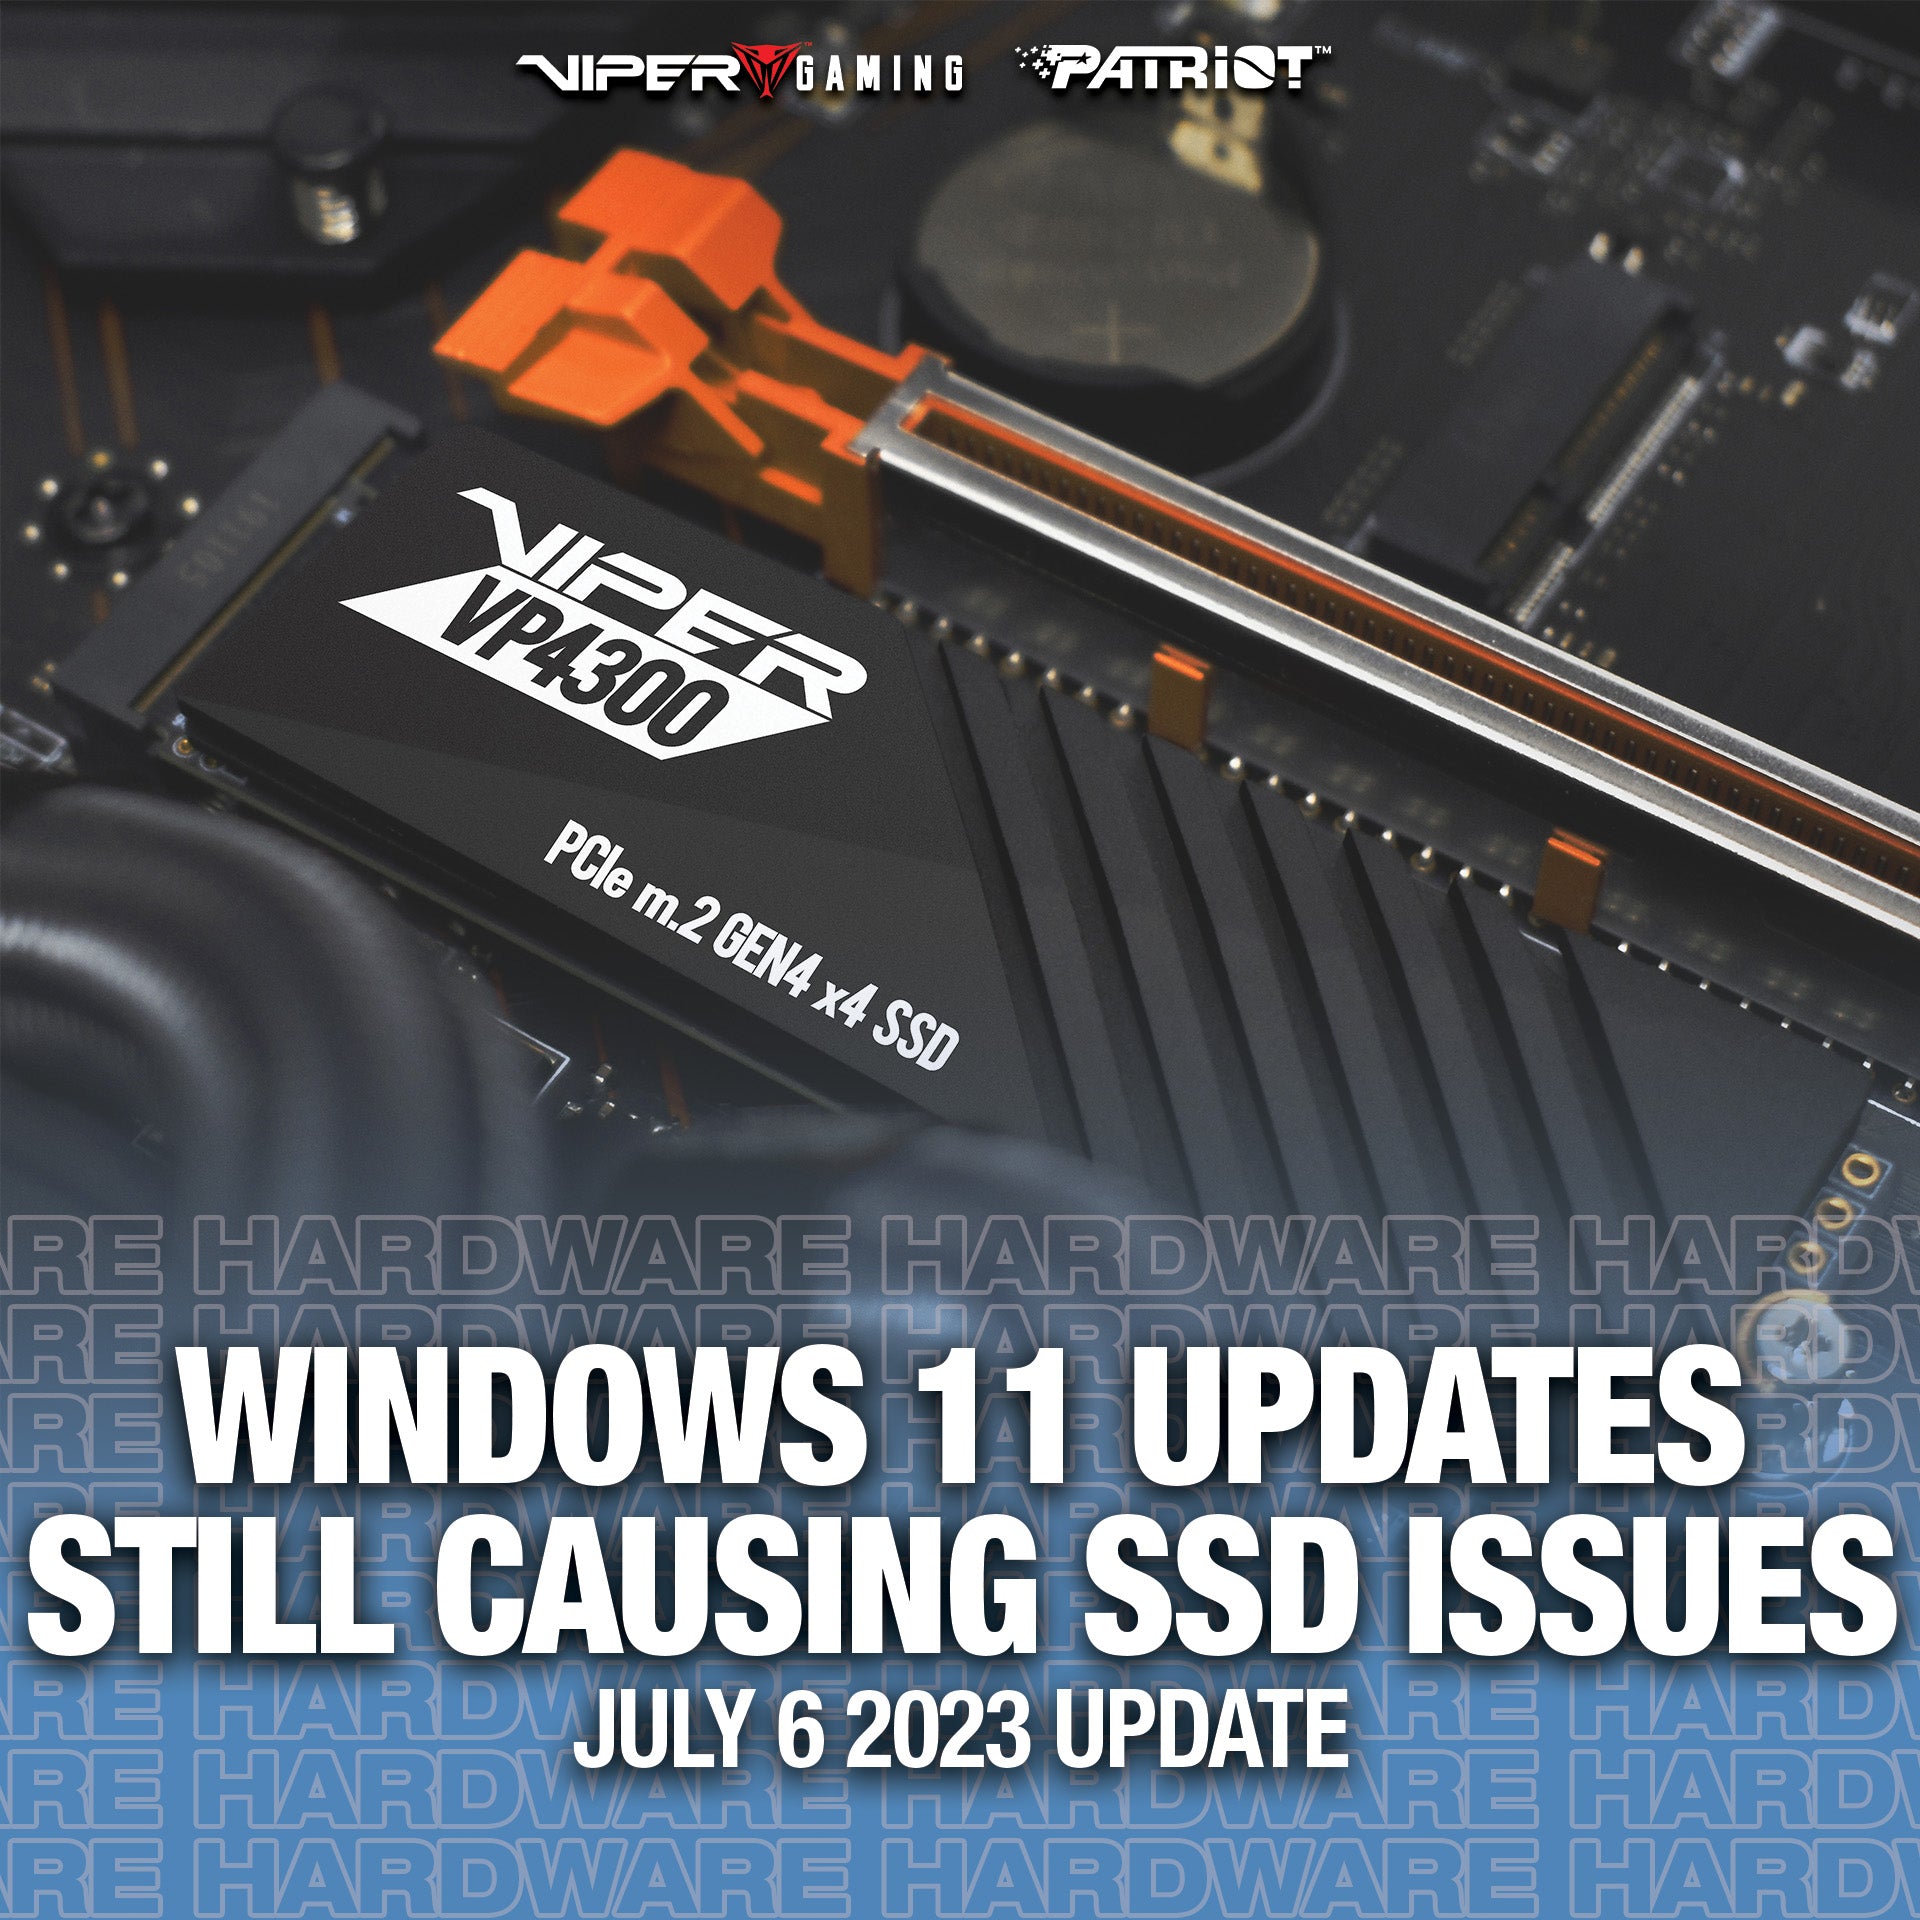 Windows 11 Update Causing SSD Performance Issues (July 6, 2023 Update)